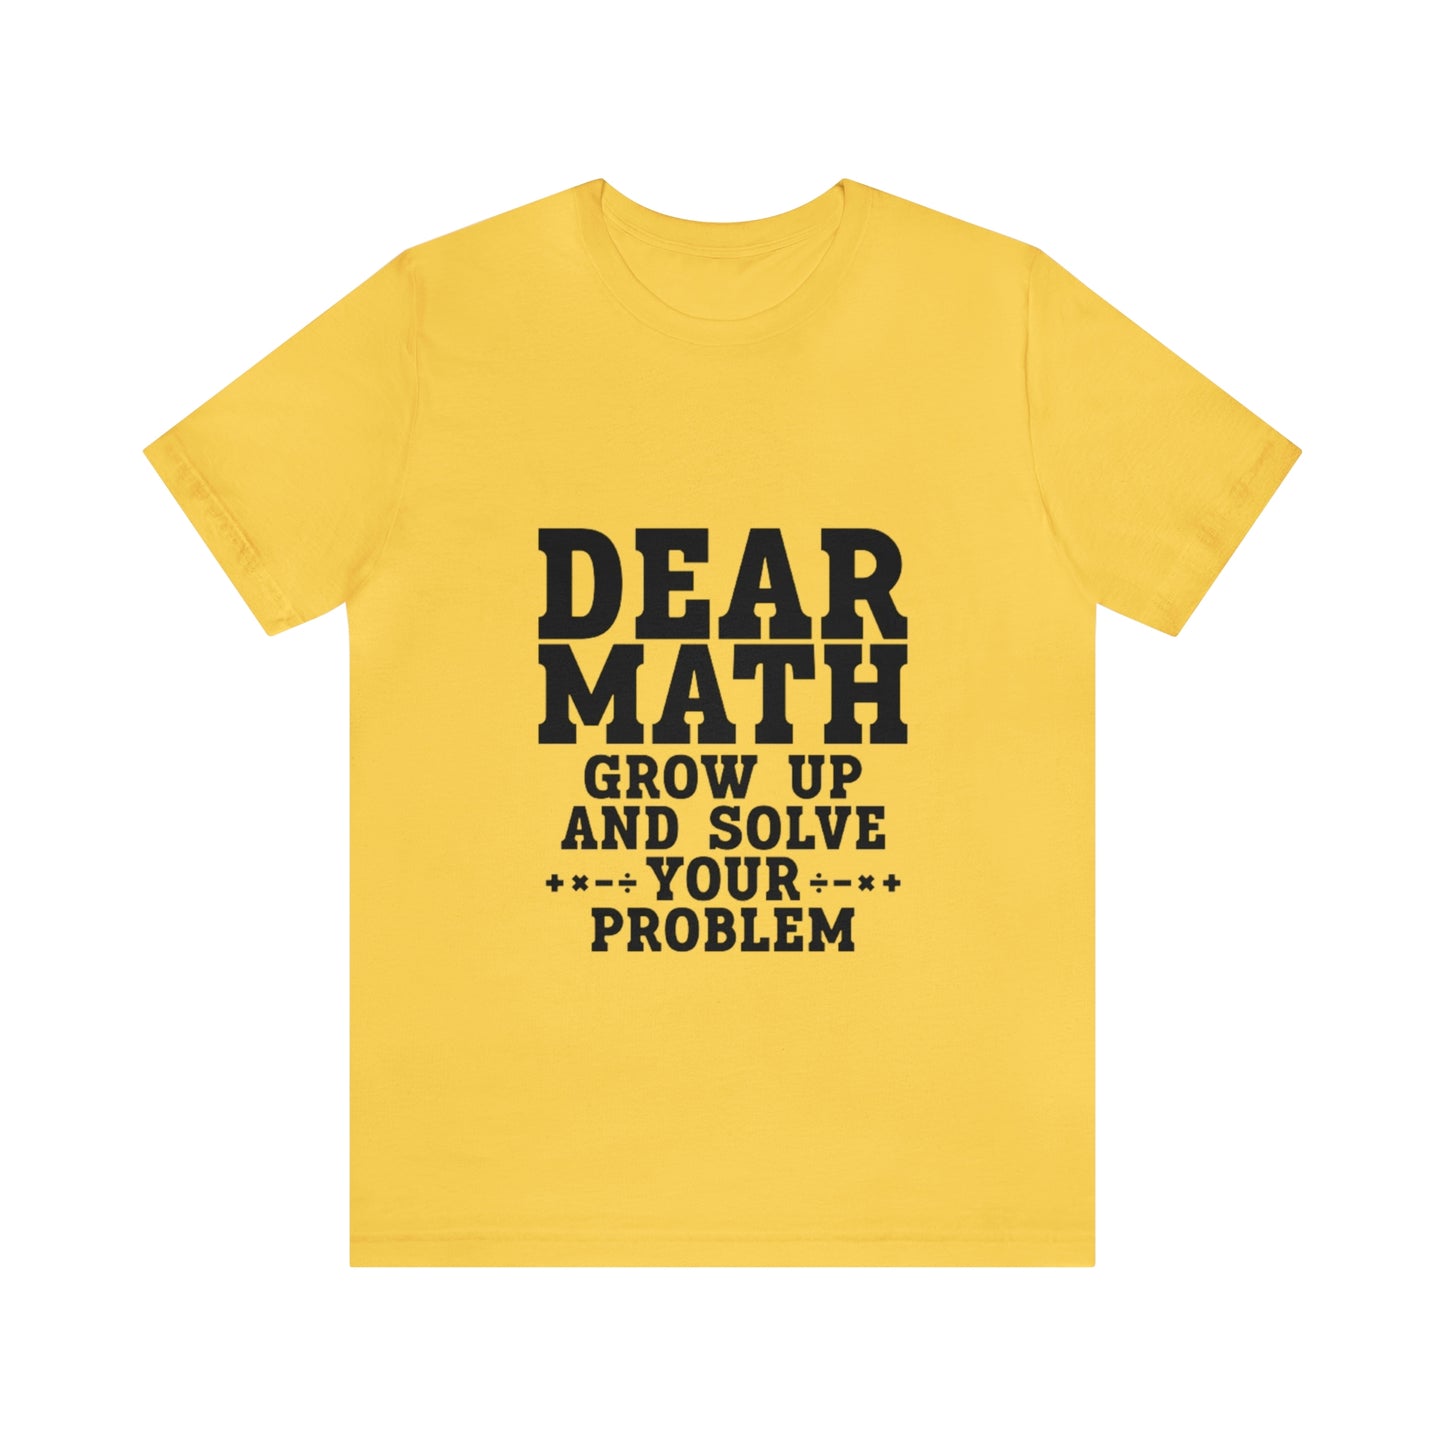 "Dear math, Grow up and solve your own problems"  Tee